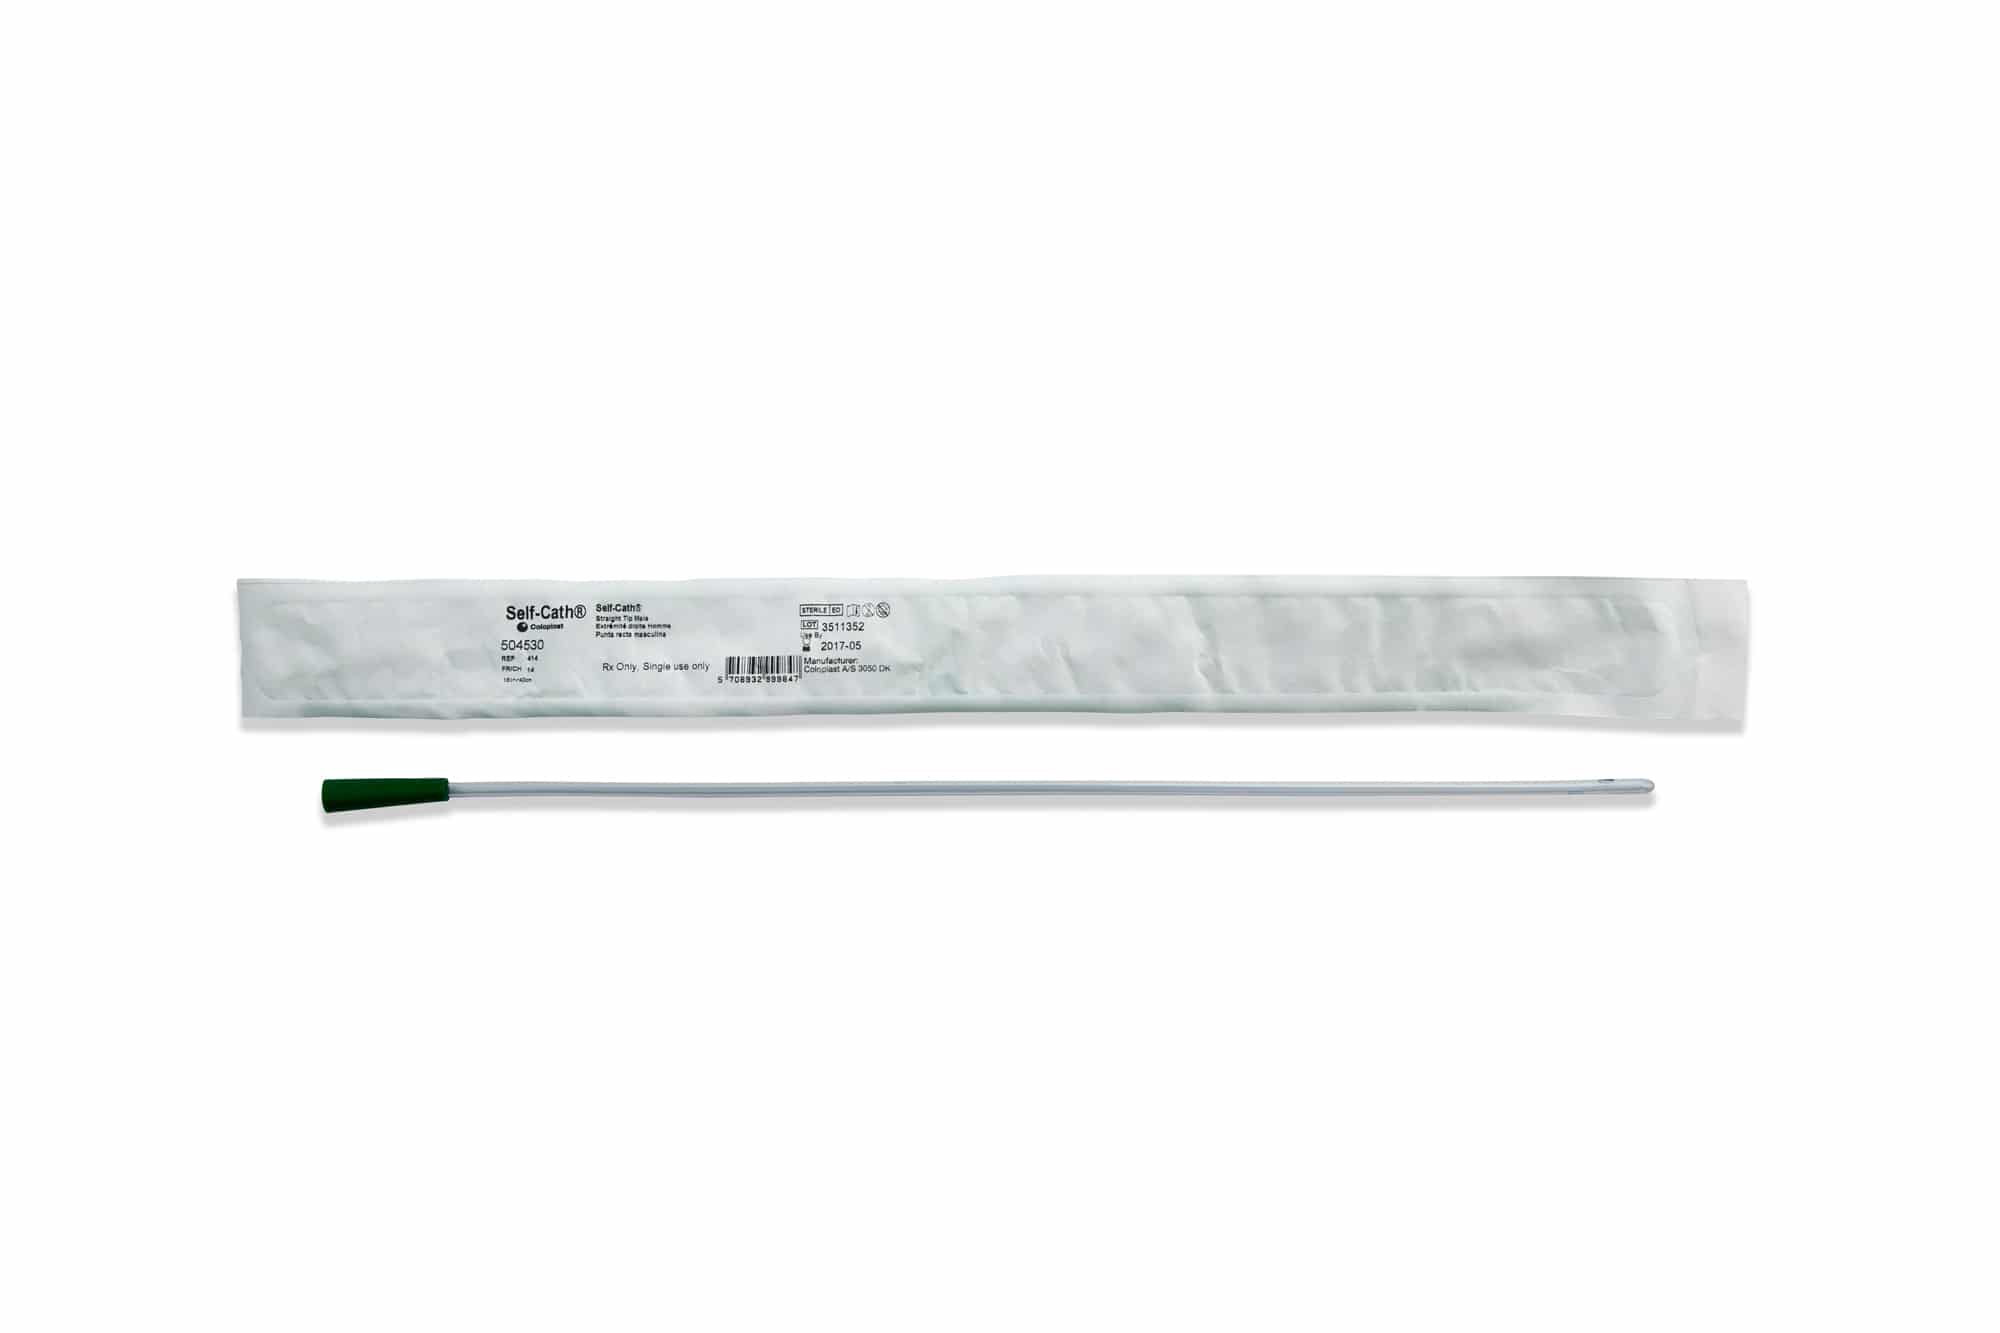 Coloplast Self-Cath Straight Male Catheter | 180 Medical